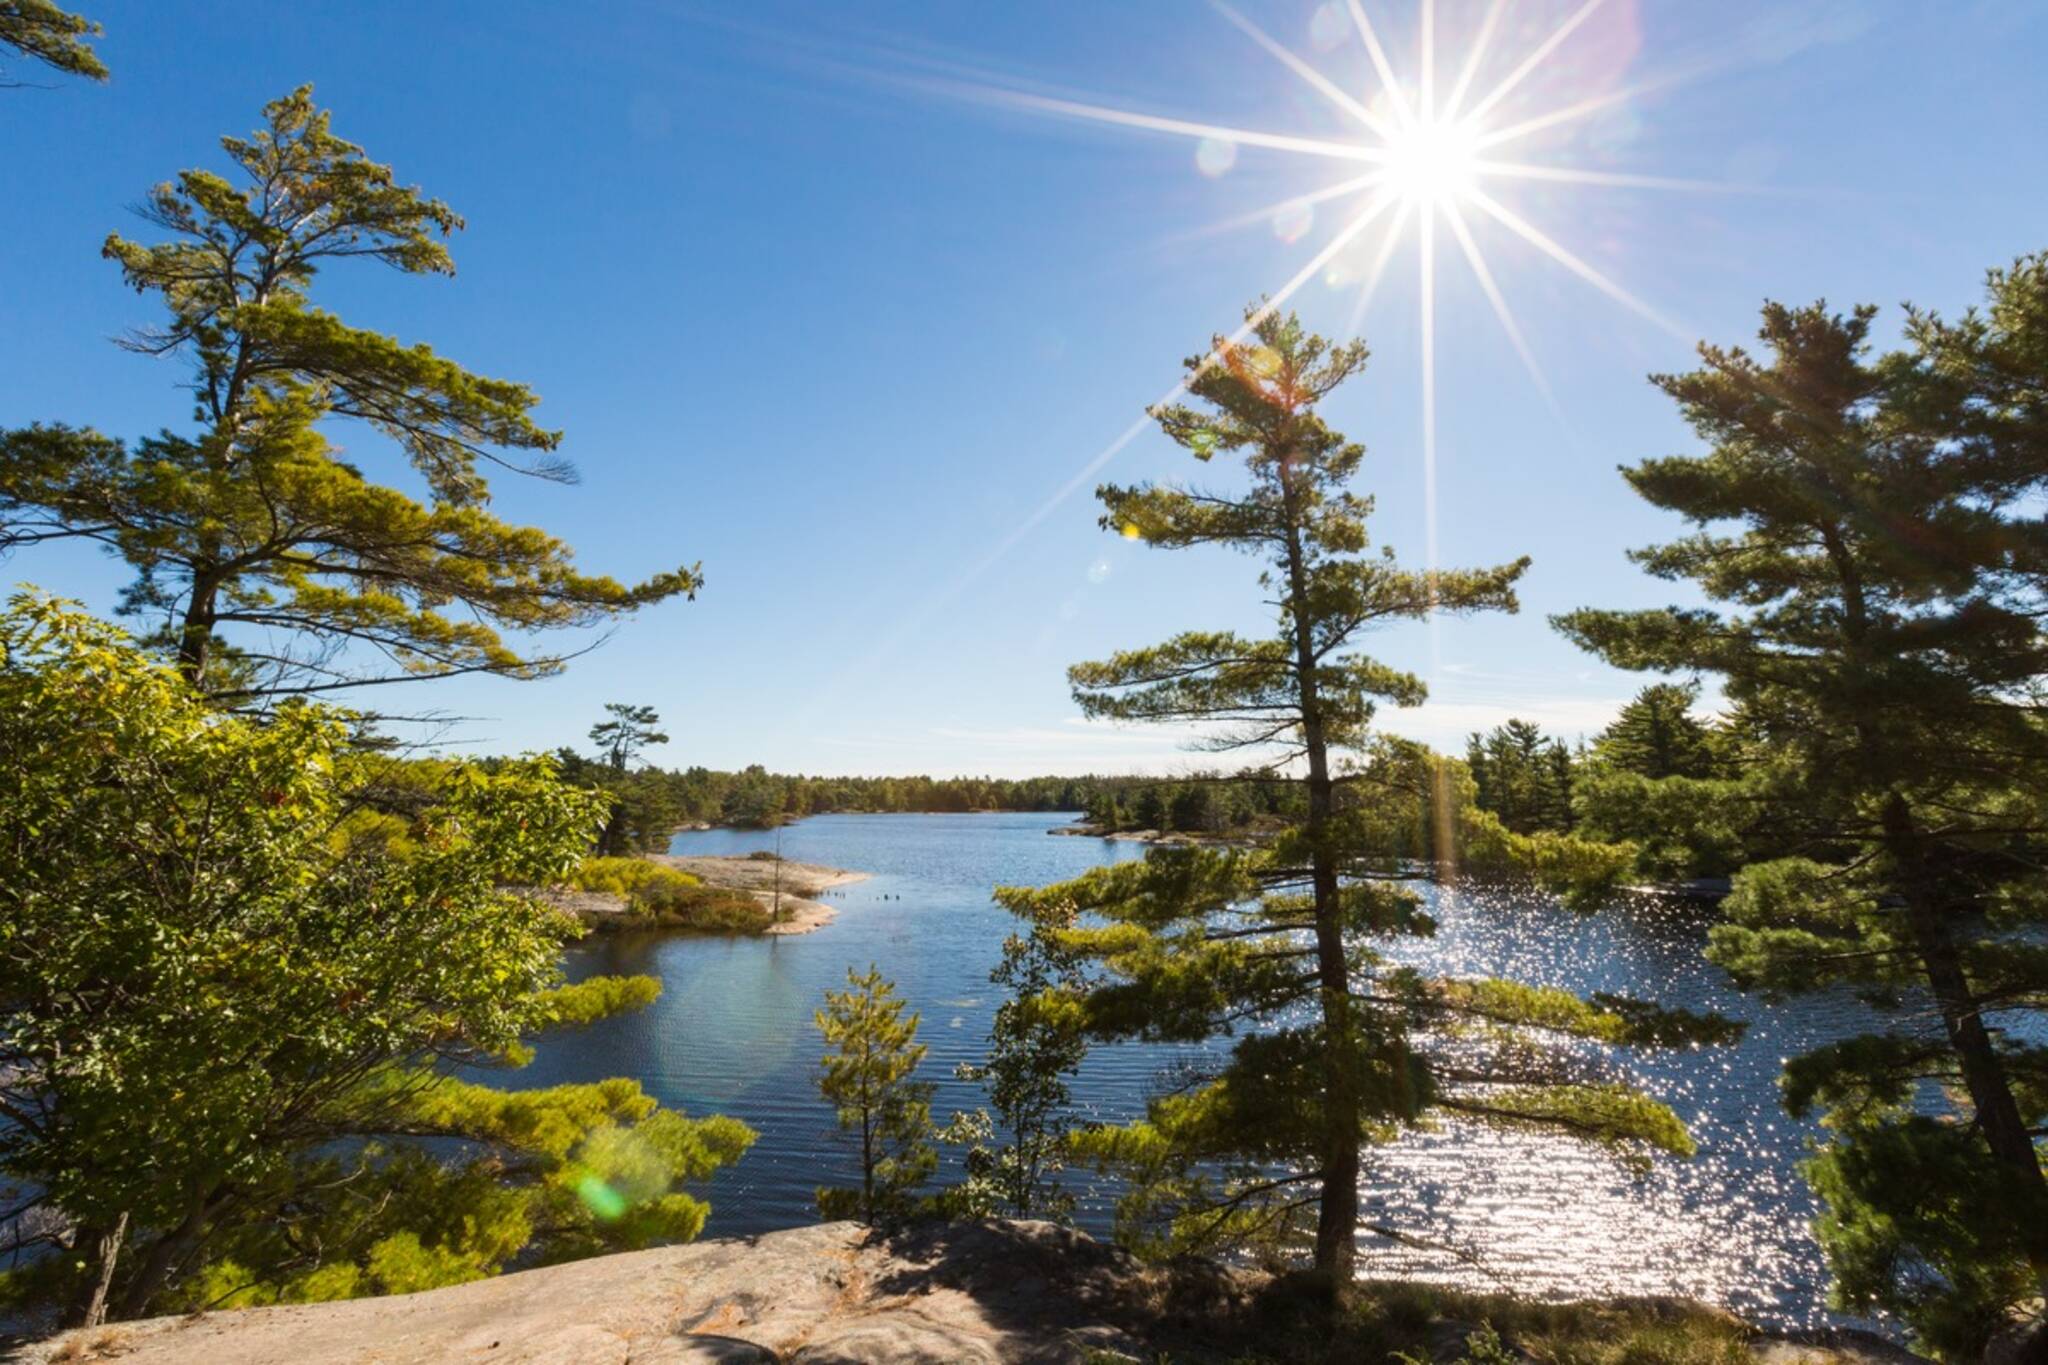 This breathtaking island is the ultimate camping destination two hours from Toronto